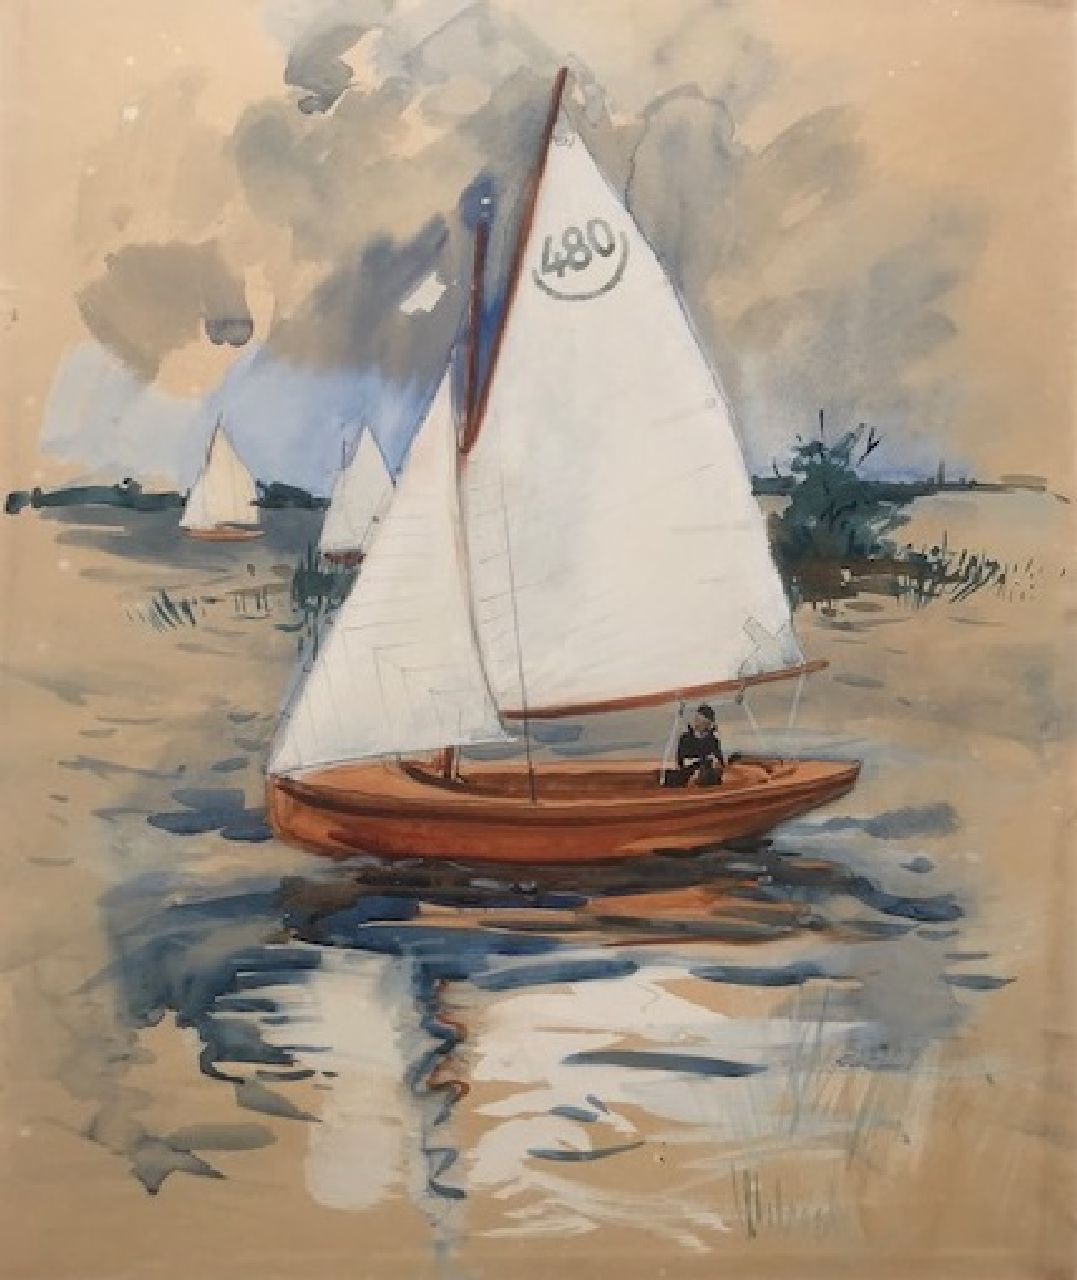 Walrecht B.H.D.  | Bernardus Hermannus David 'Ben' Walrecht | Watercolours and drawings offered for sale | Sailing on the paterswoldsemeer, Groningen, watercolour on paper 46.2 x 38.2 cm, signed l.r.